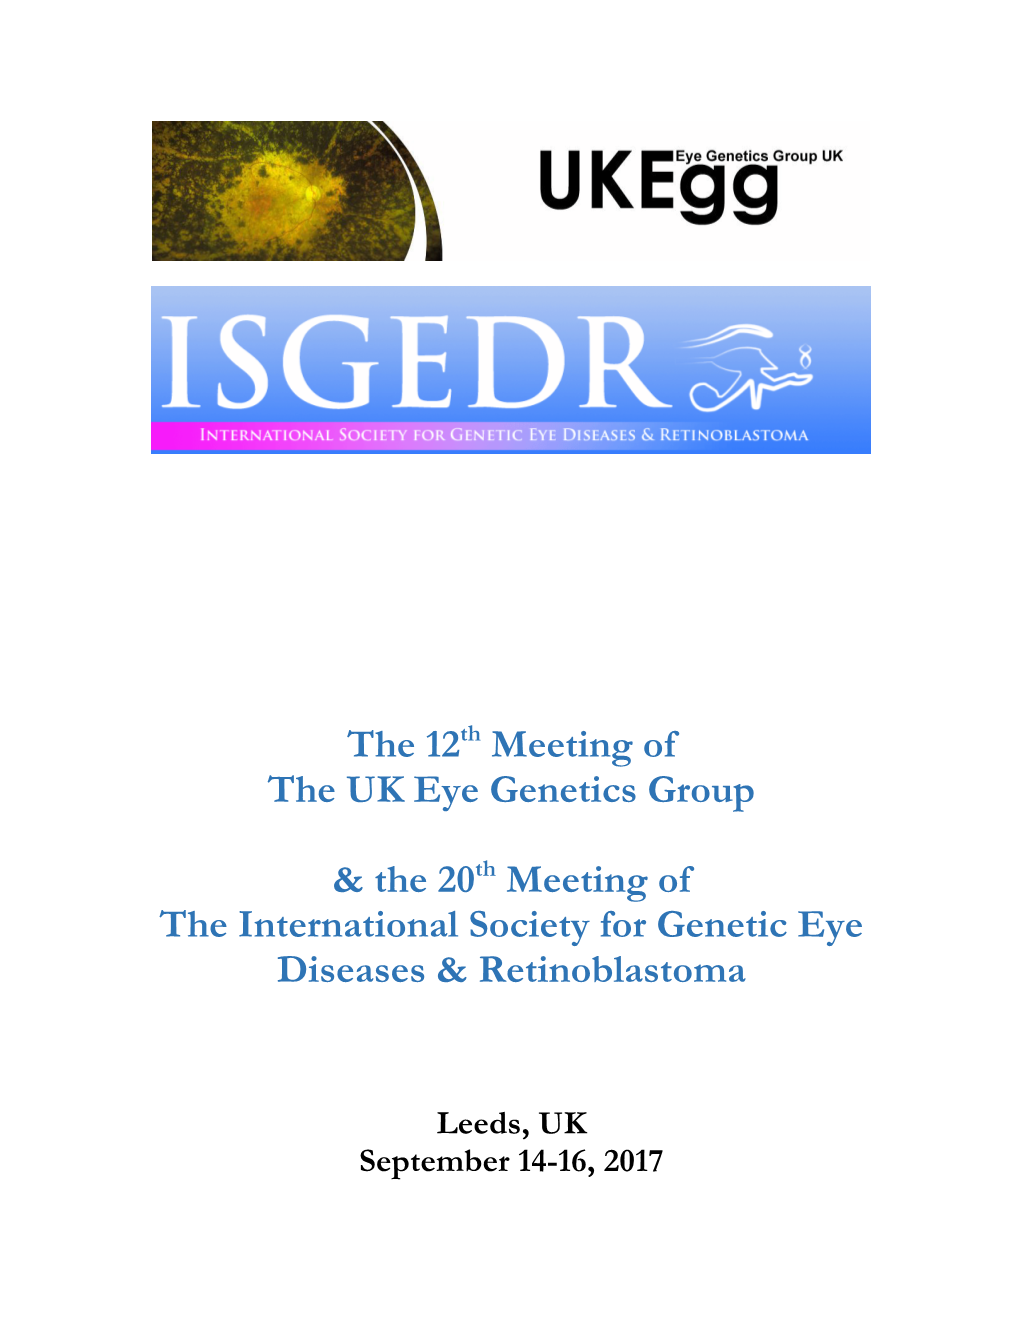 The 12Th Meeting of the UK Eye Genetics Group